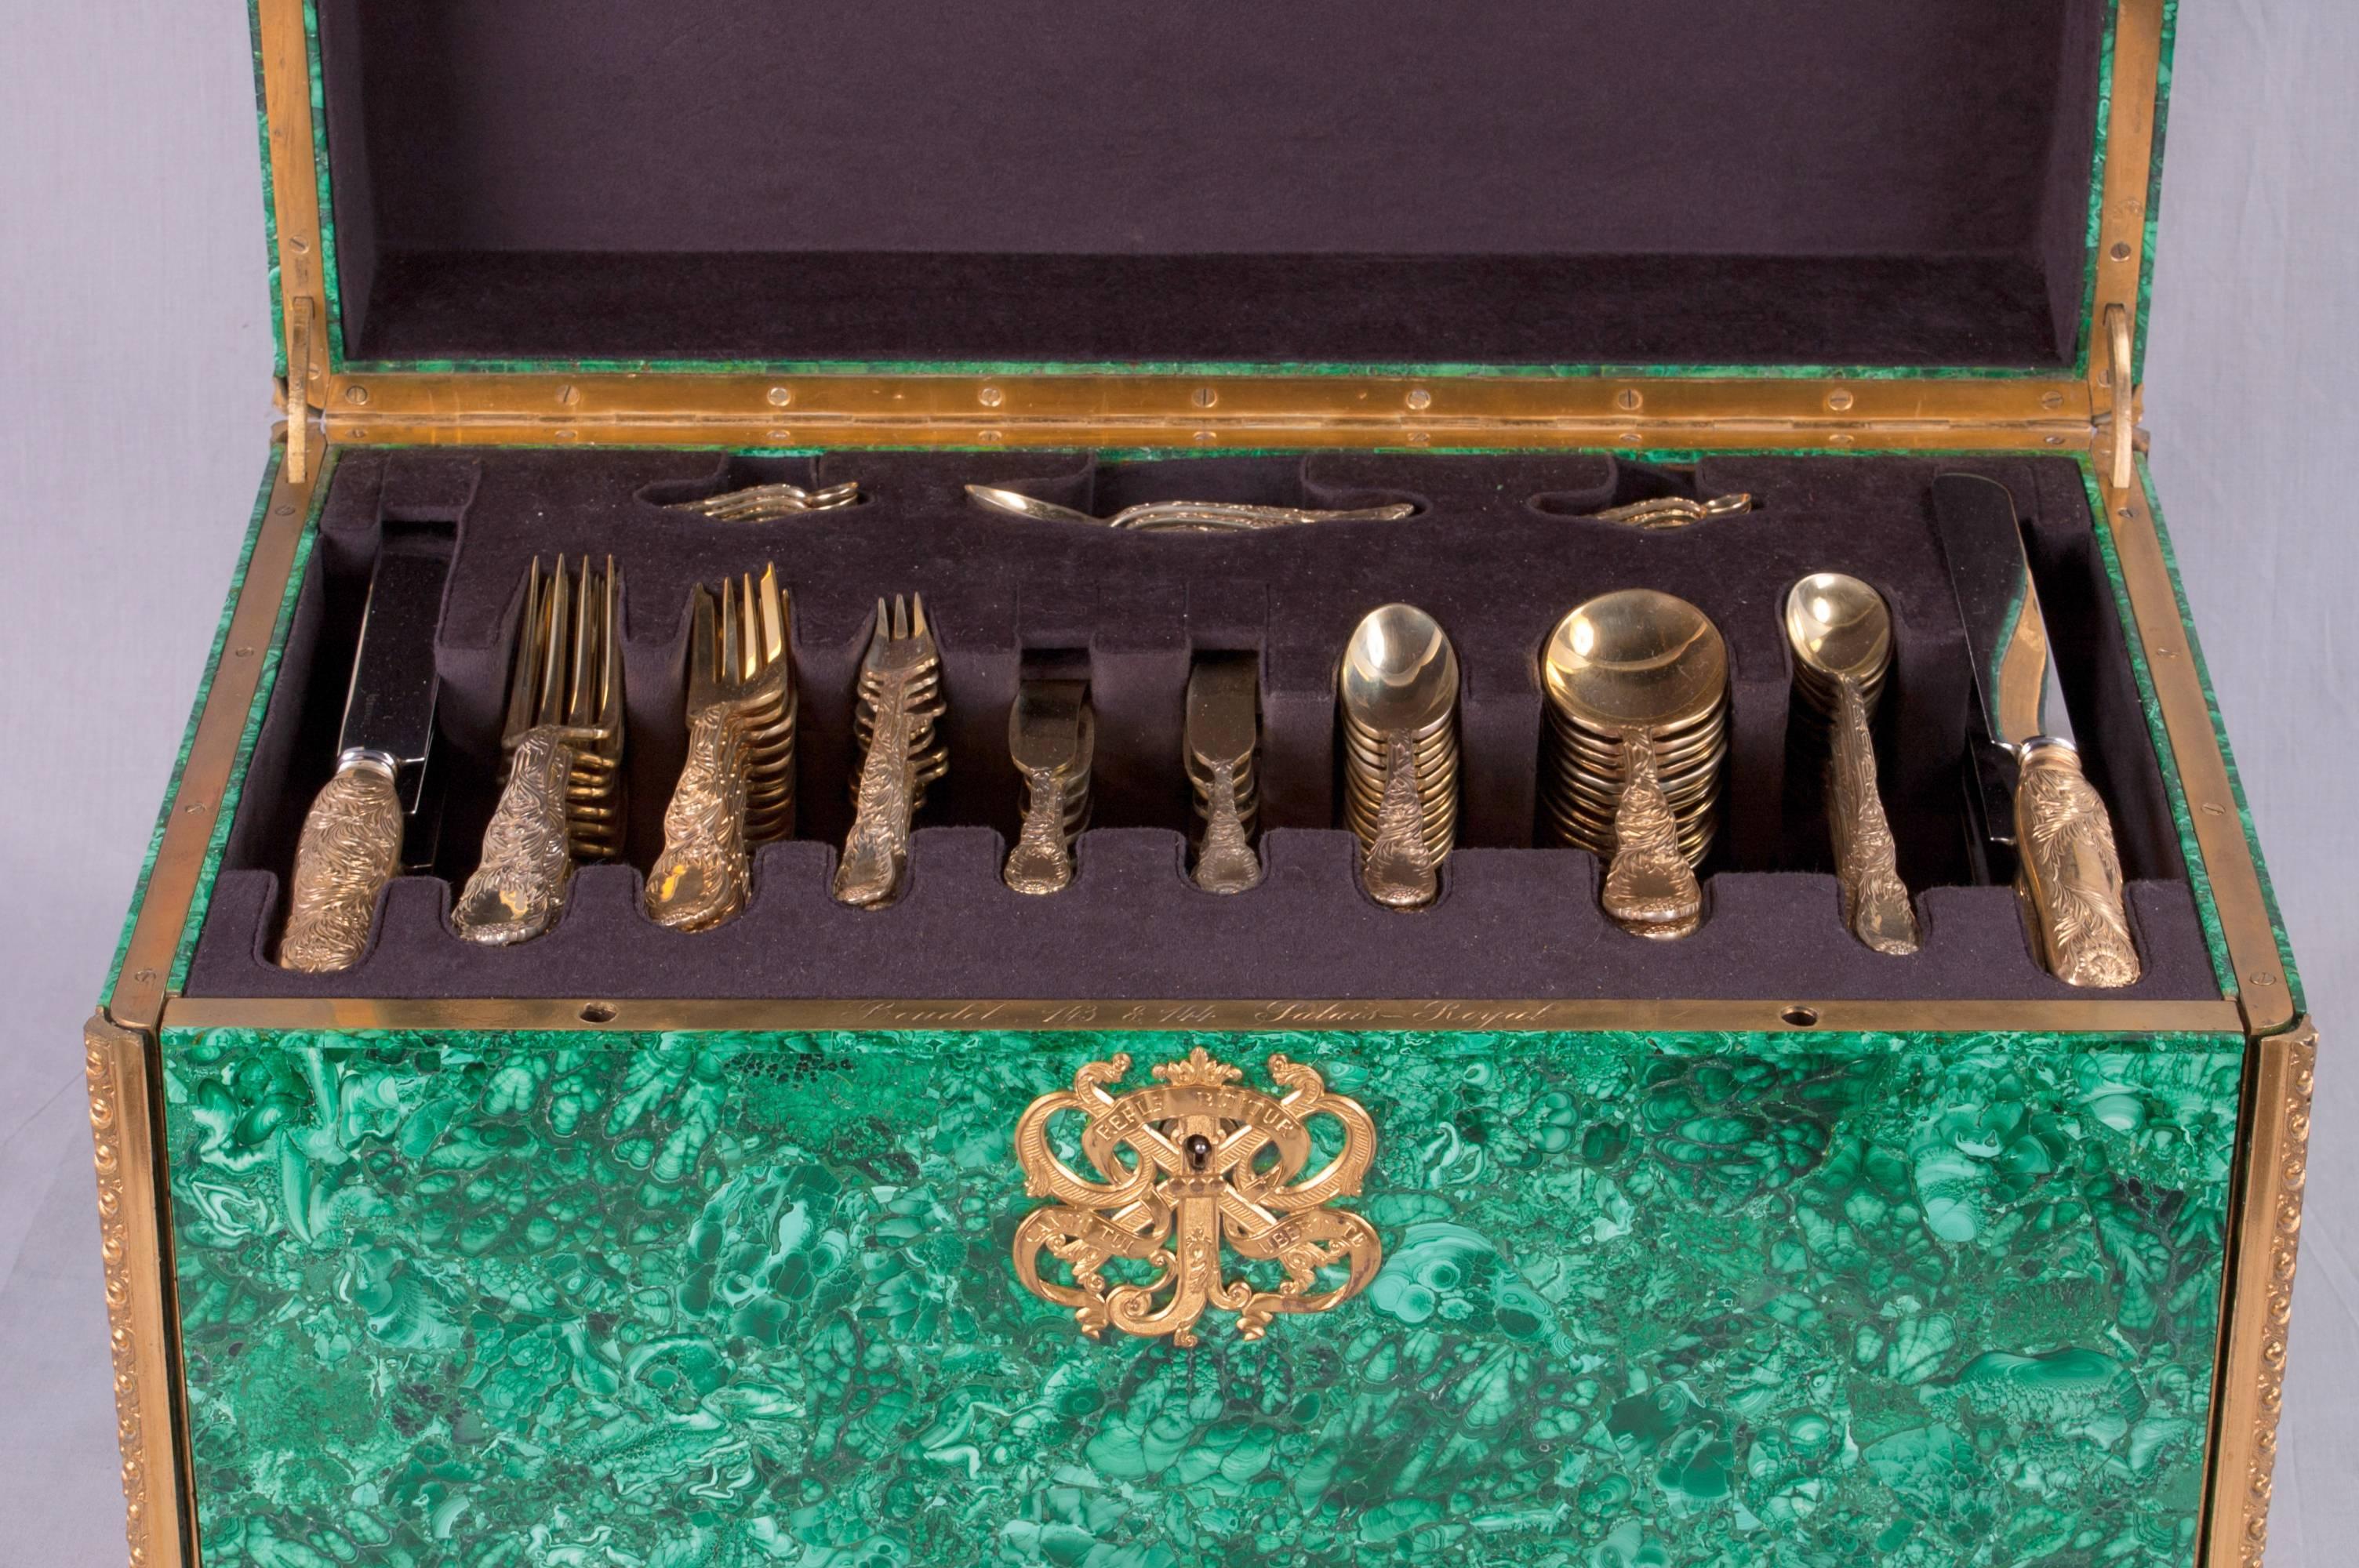 Set of 120-piece Tiffany Gilt Chrysanthemum flatware is nested in a converted malachite and bronze dore fitted chest that was formerly a necessaire travel case, signed Boudet.
The chest was made earlier than the sterling, circa 1840 and certainly